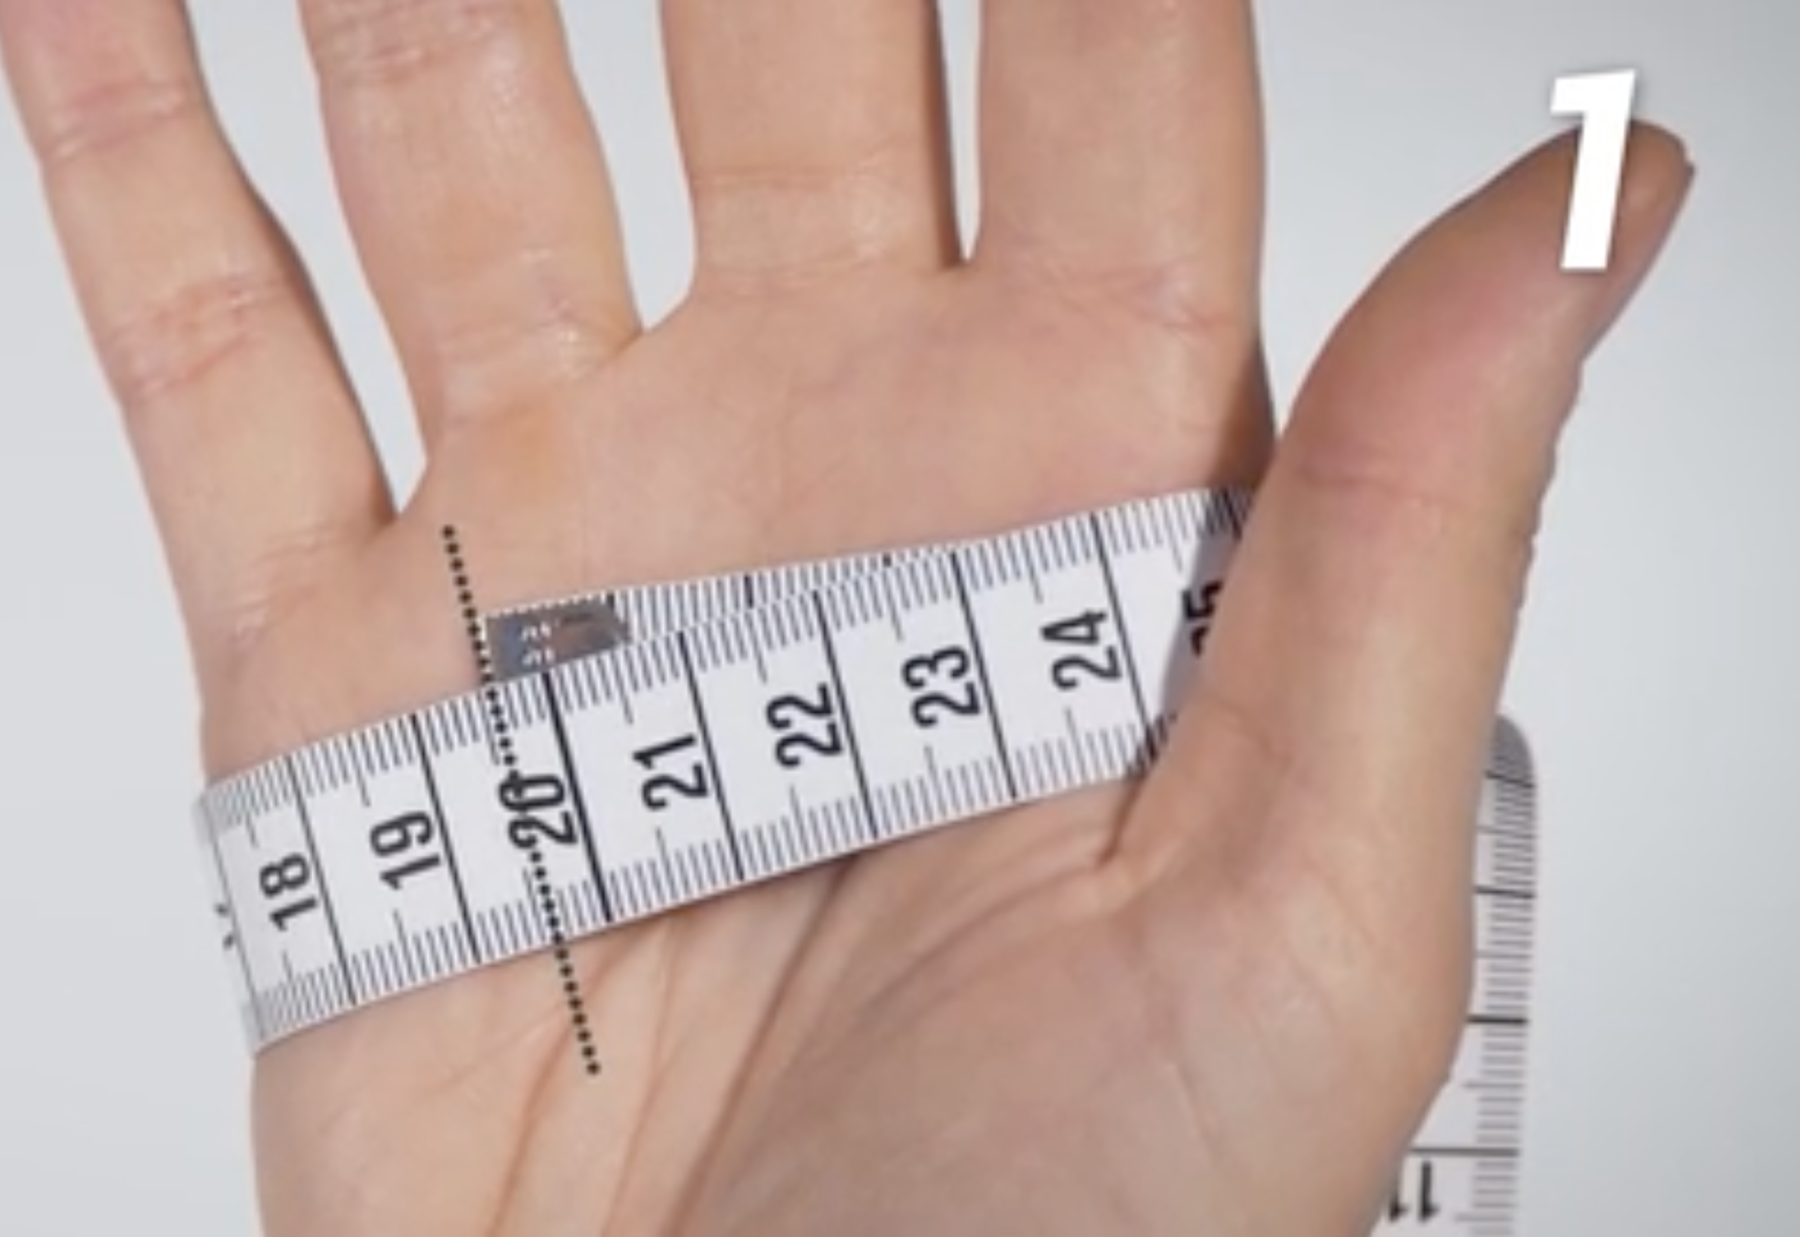 measure the palm using a measuring tape